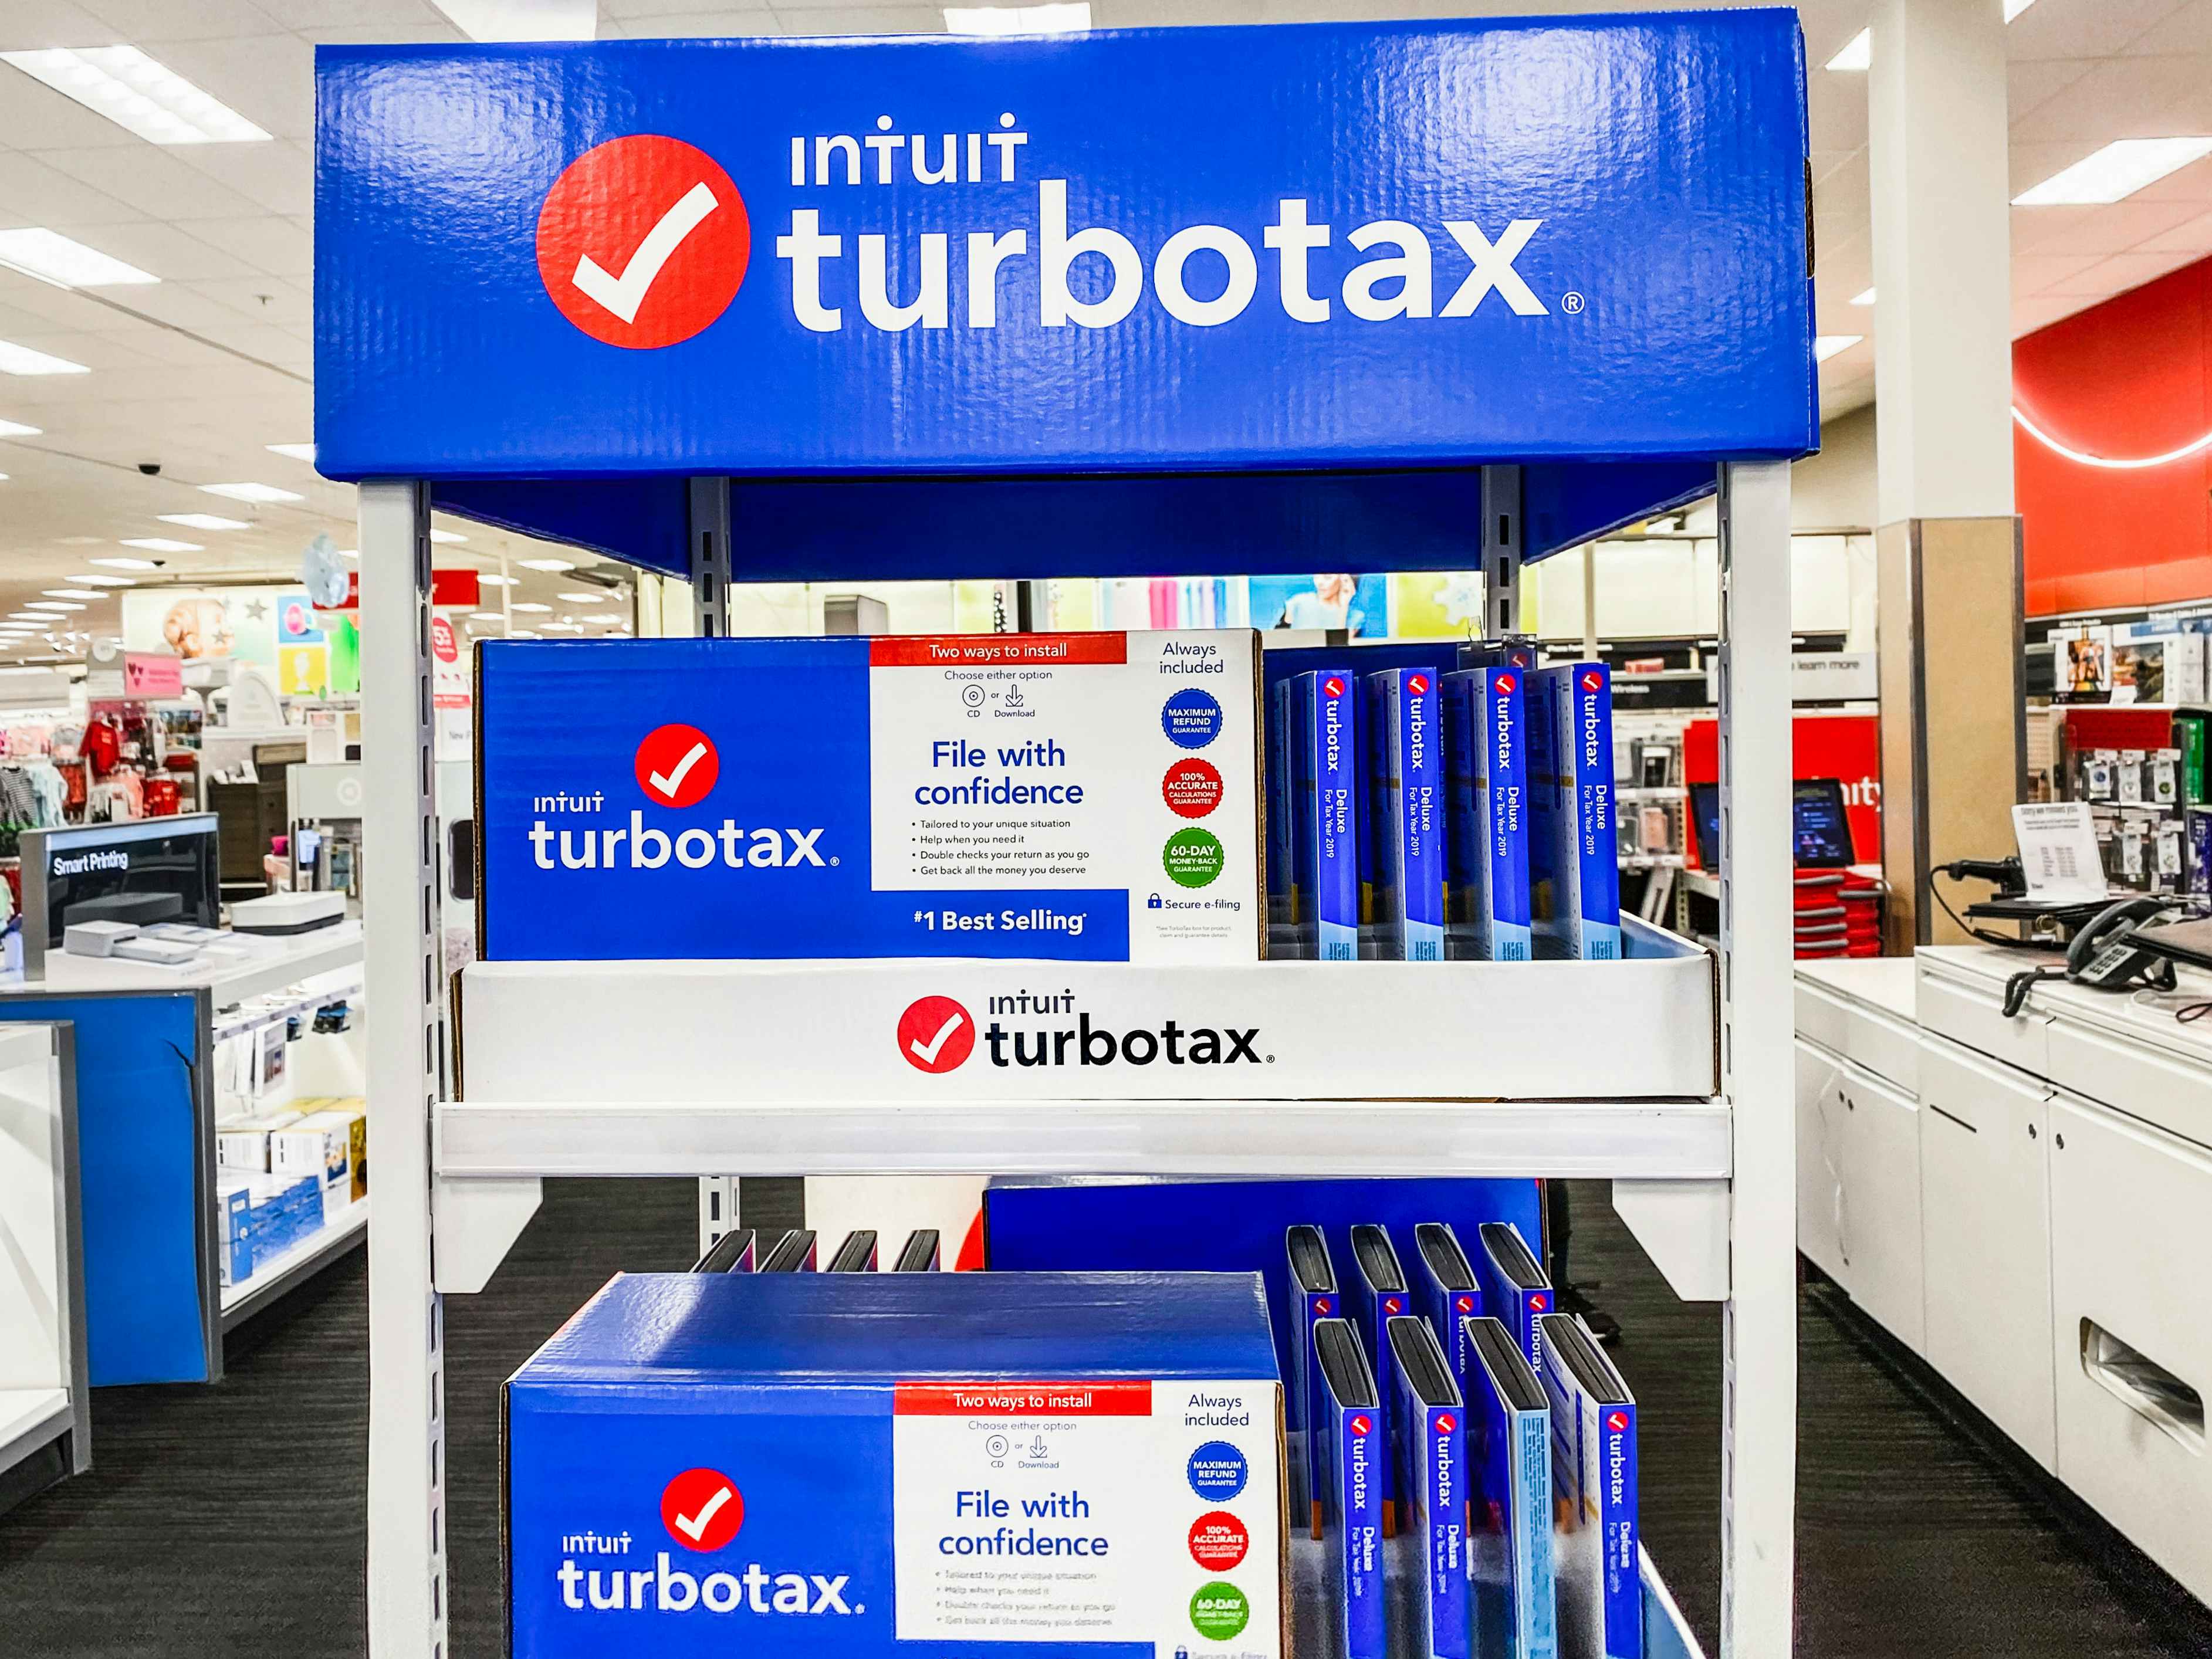 TurboTax display in a store